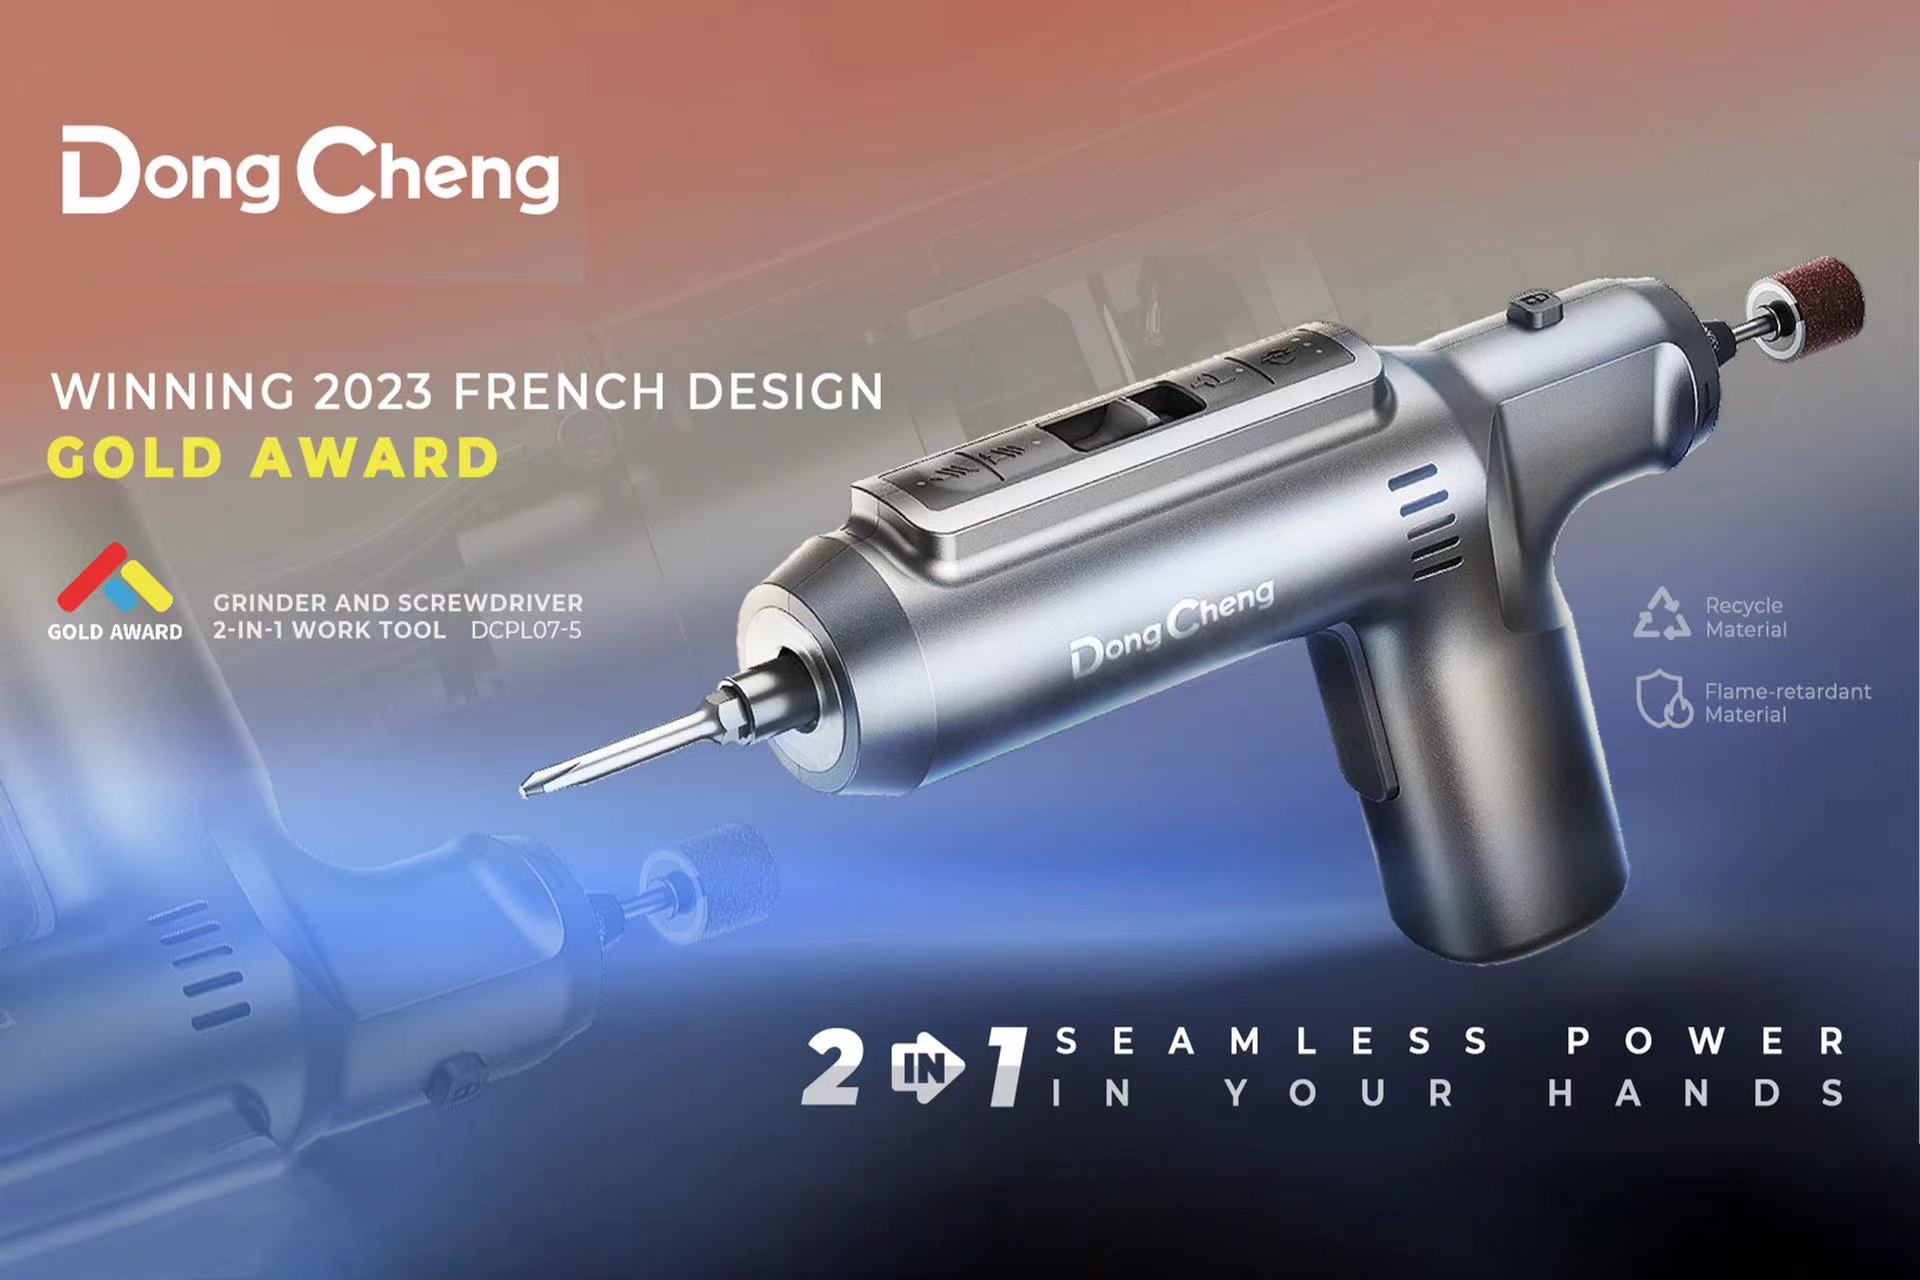 DongCheng’s 2-in-1 Cordless Grinder-Driver Tool Wins 2023 French Design Gold Award